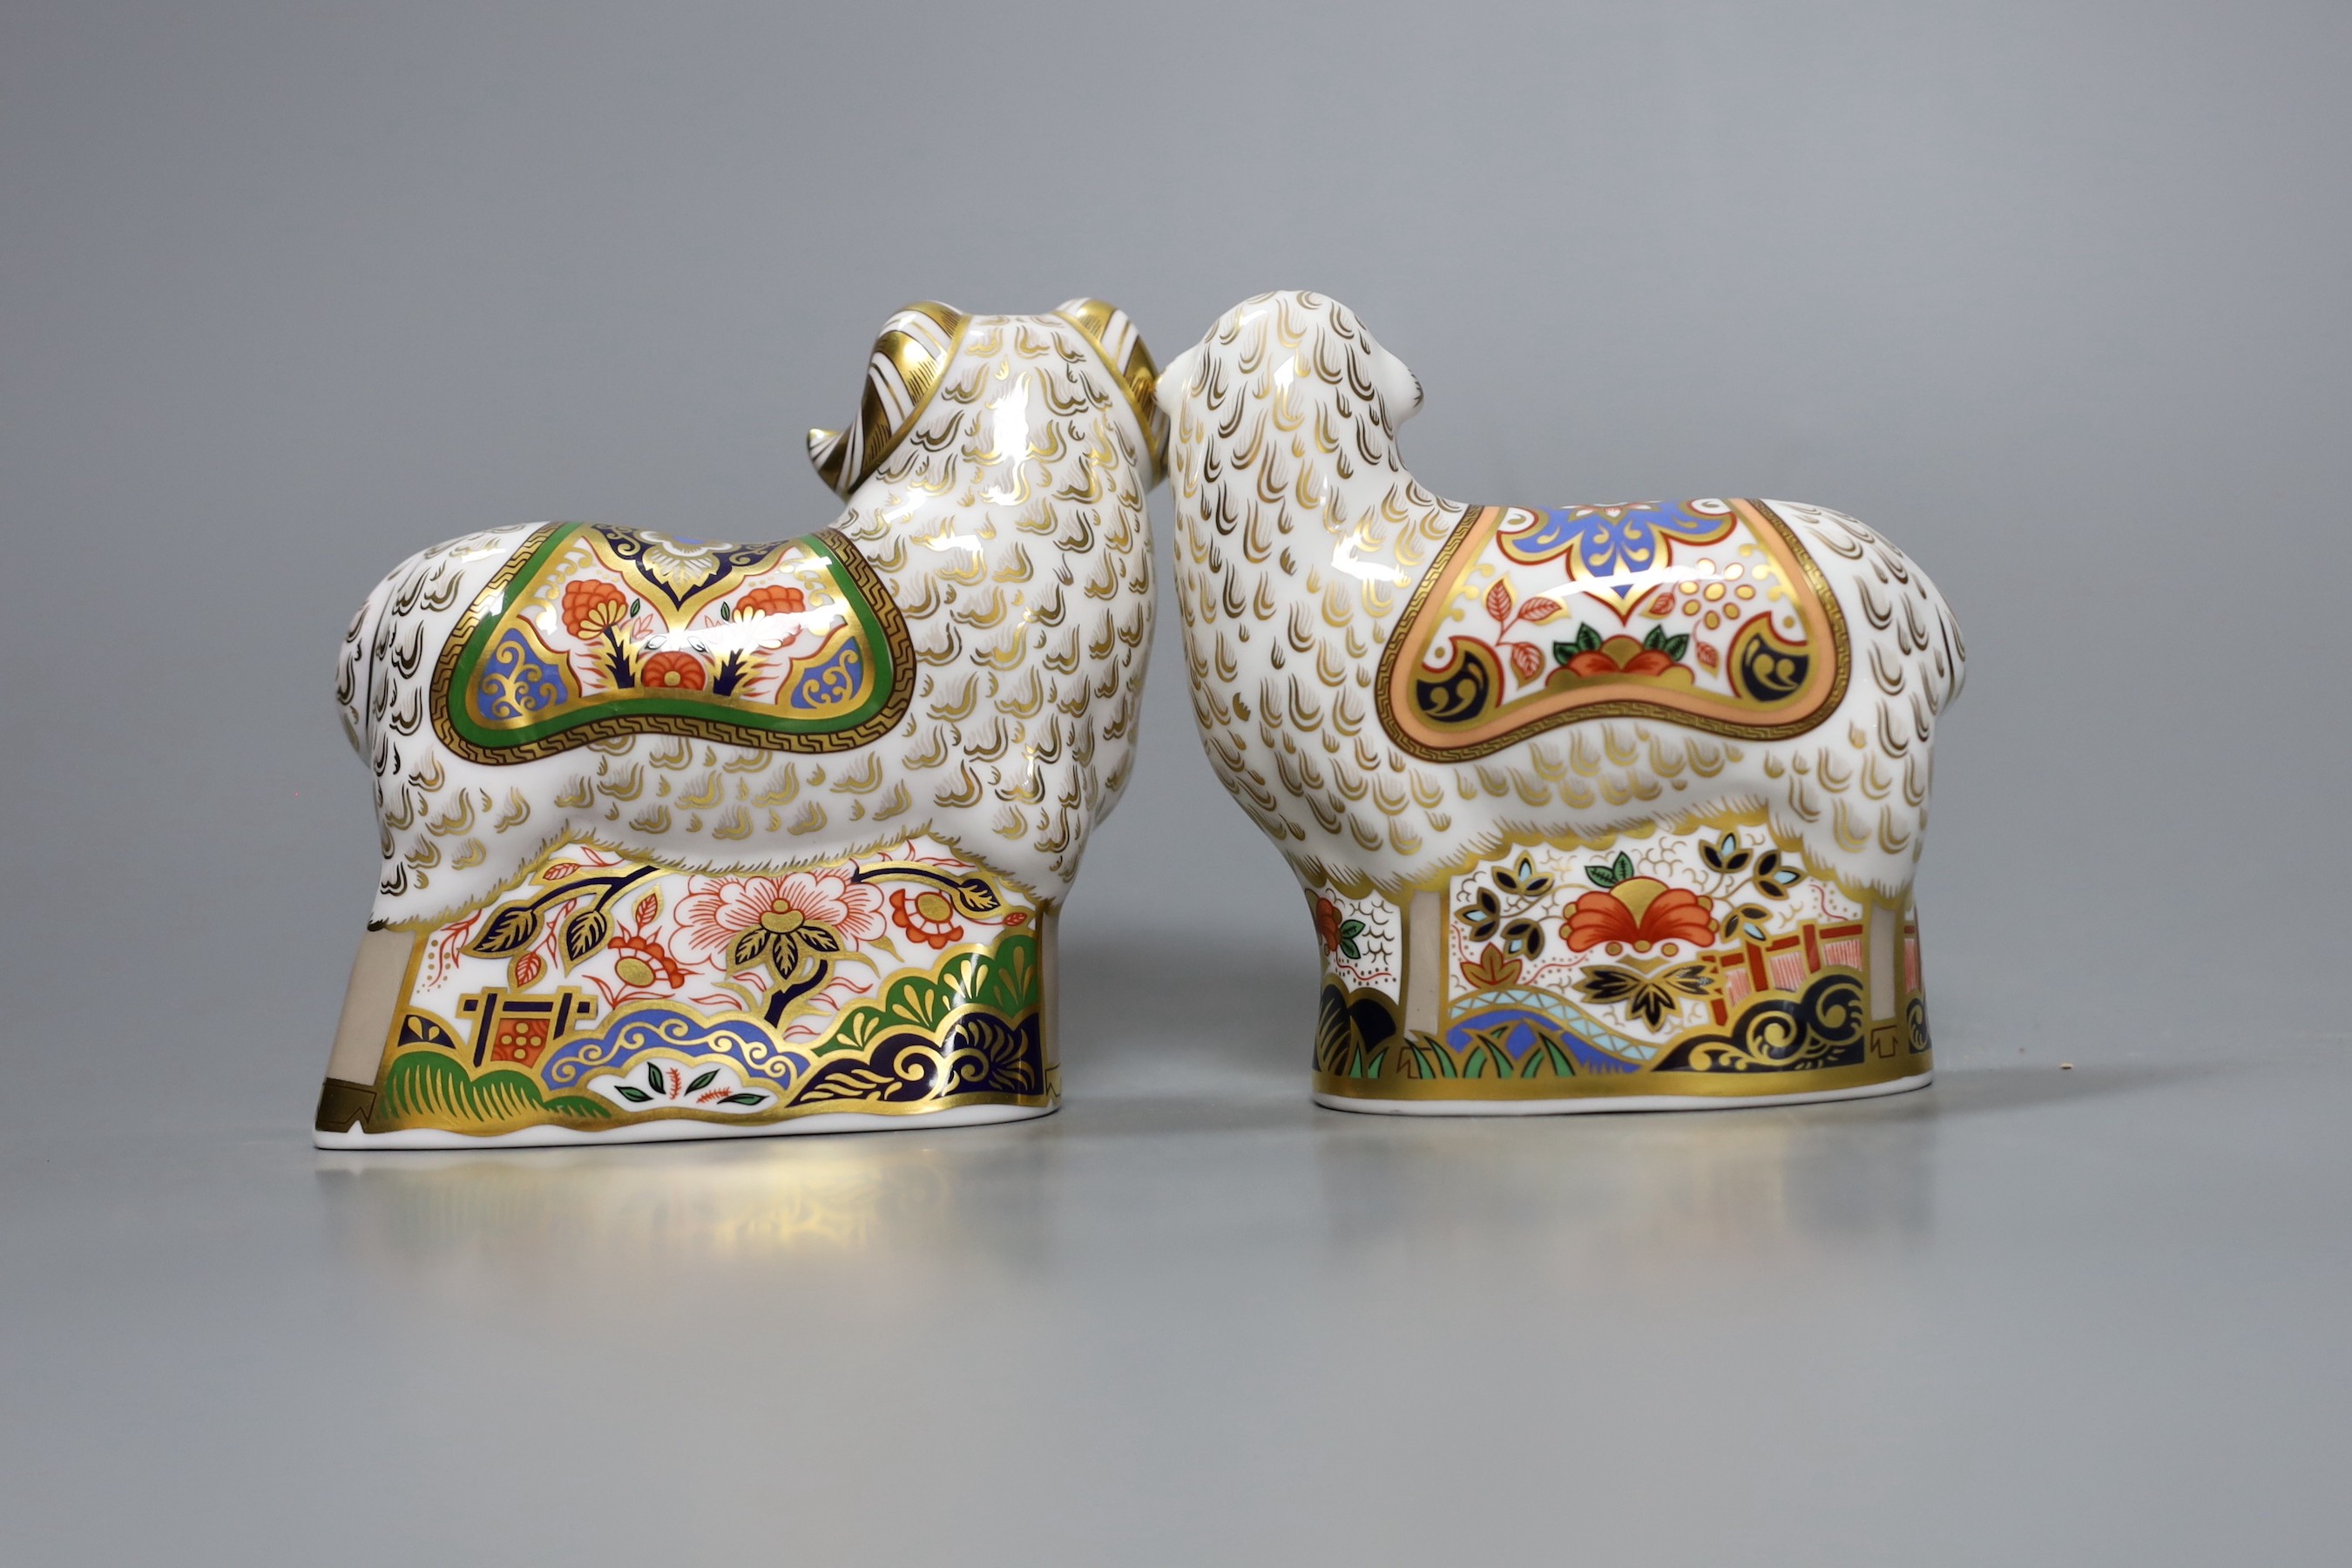 Two Royal Crown Derby paperweight - Imari Ram, gold stopper, boxed, no certificate and Imari Ram, gold stopper, boxed, no certificate